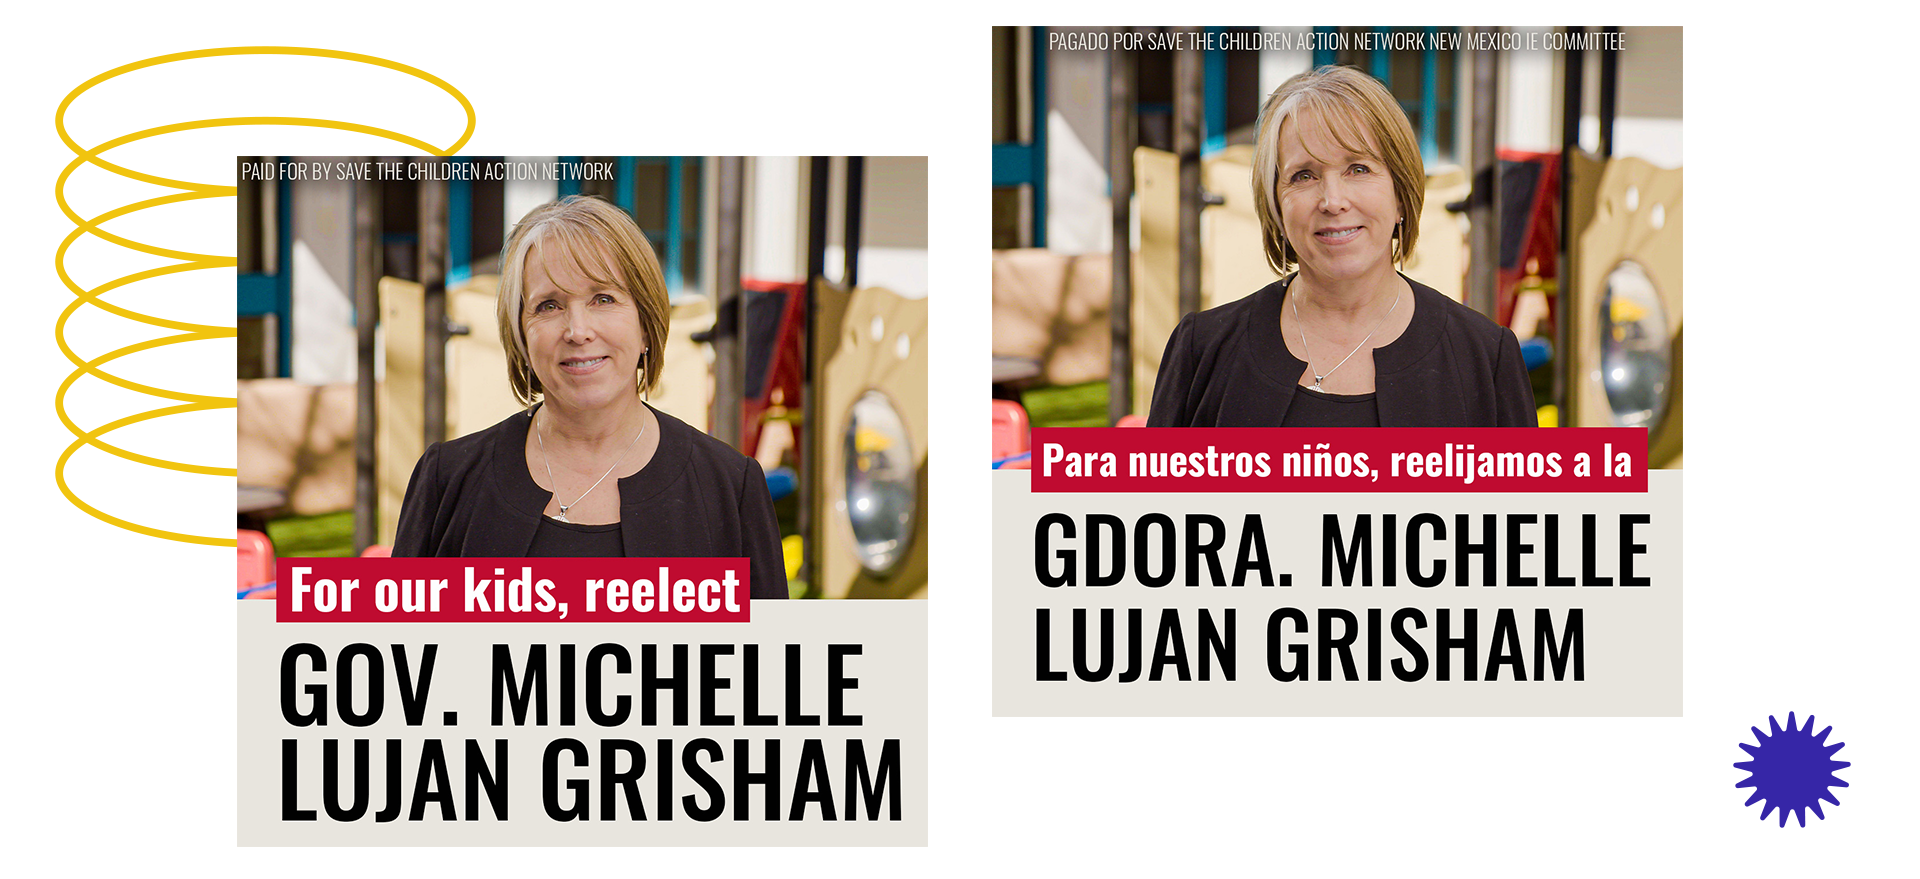 English and Spanish ad versions for Michelle Lujan Grisham